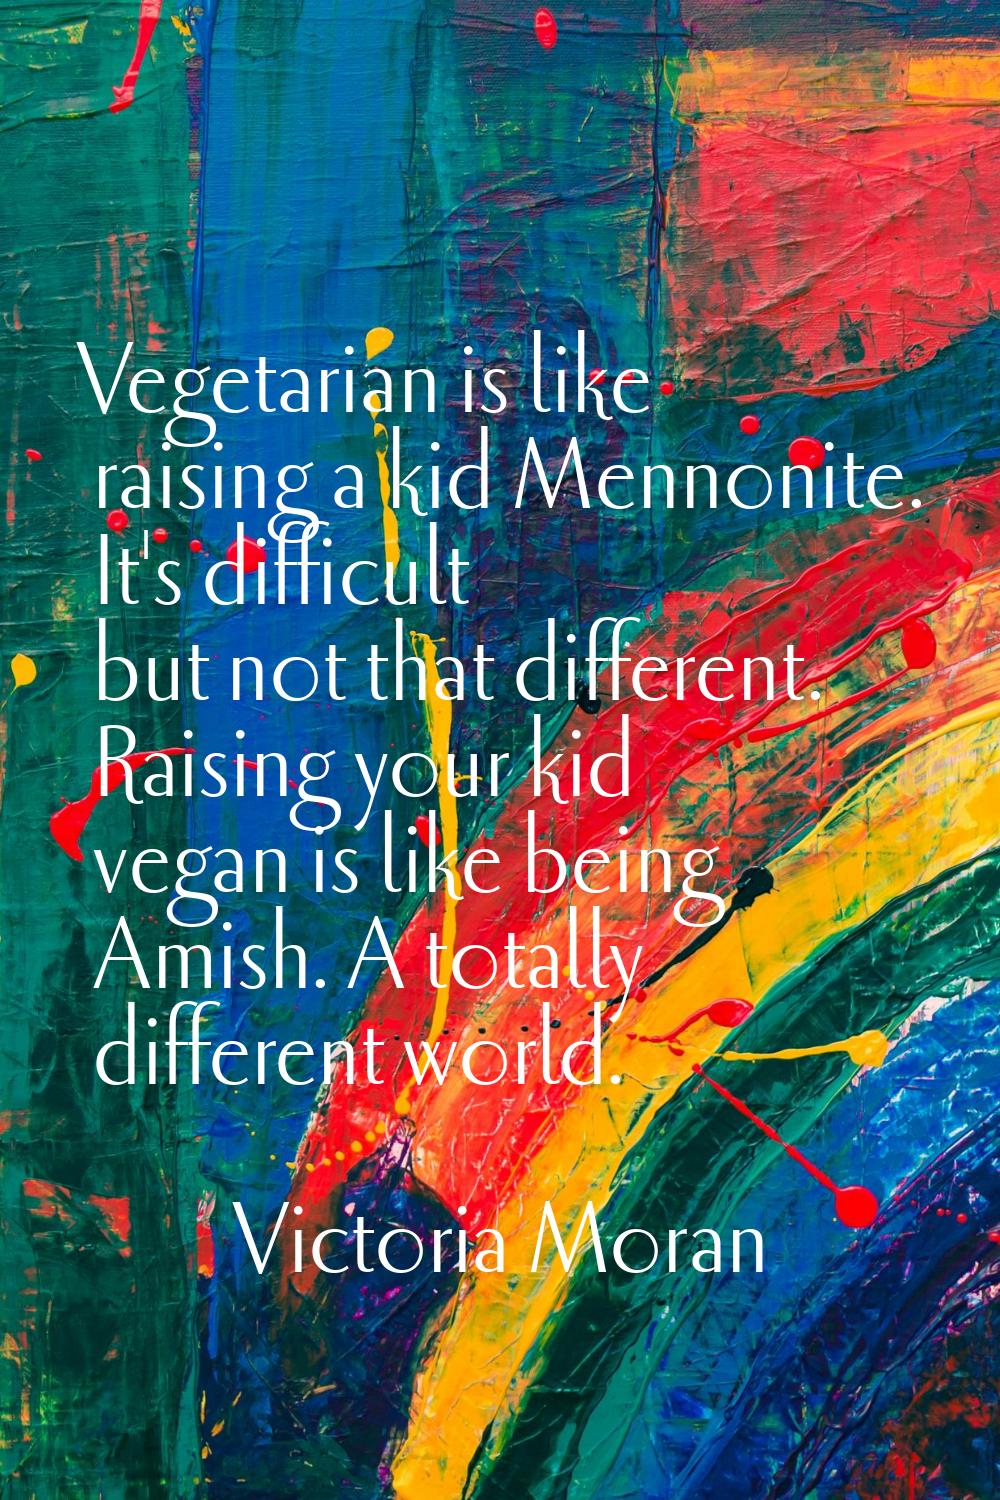 Vegetarian is like raising a kid Mennonite. It's difficult but not that different. Raising your kid